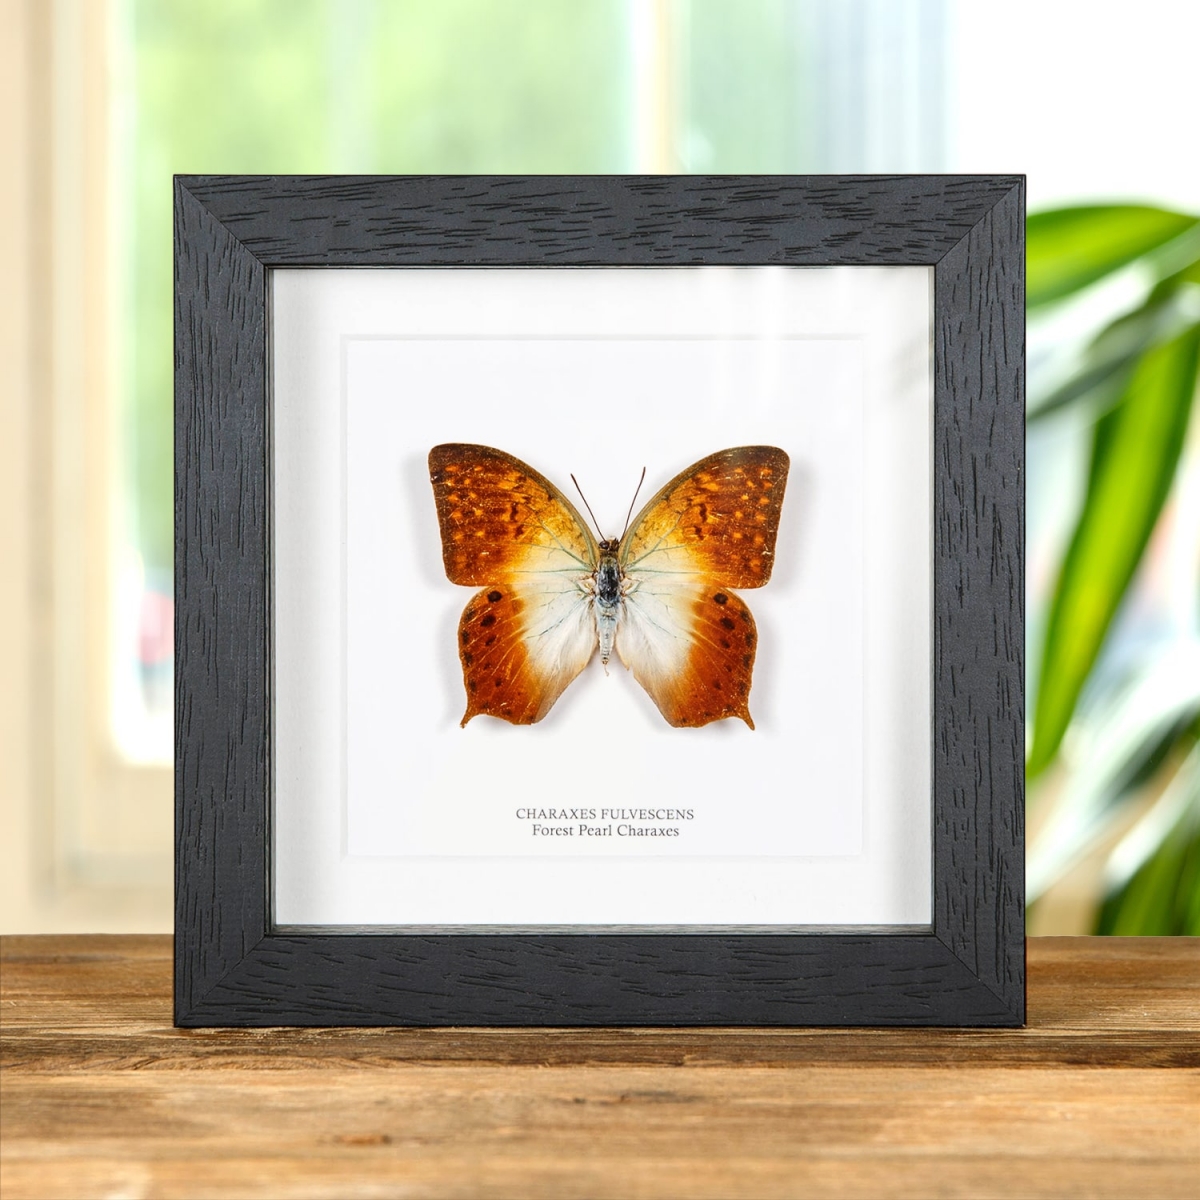 Minibeast Forest Pearl Charaxes In Box Frame (Charaxes fulvescens)